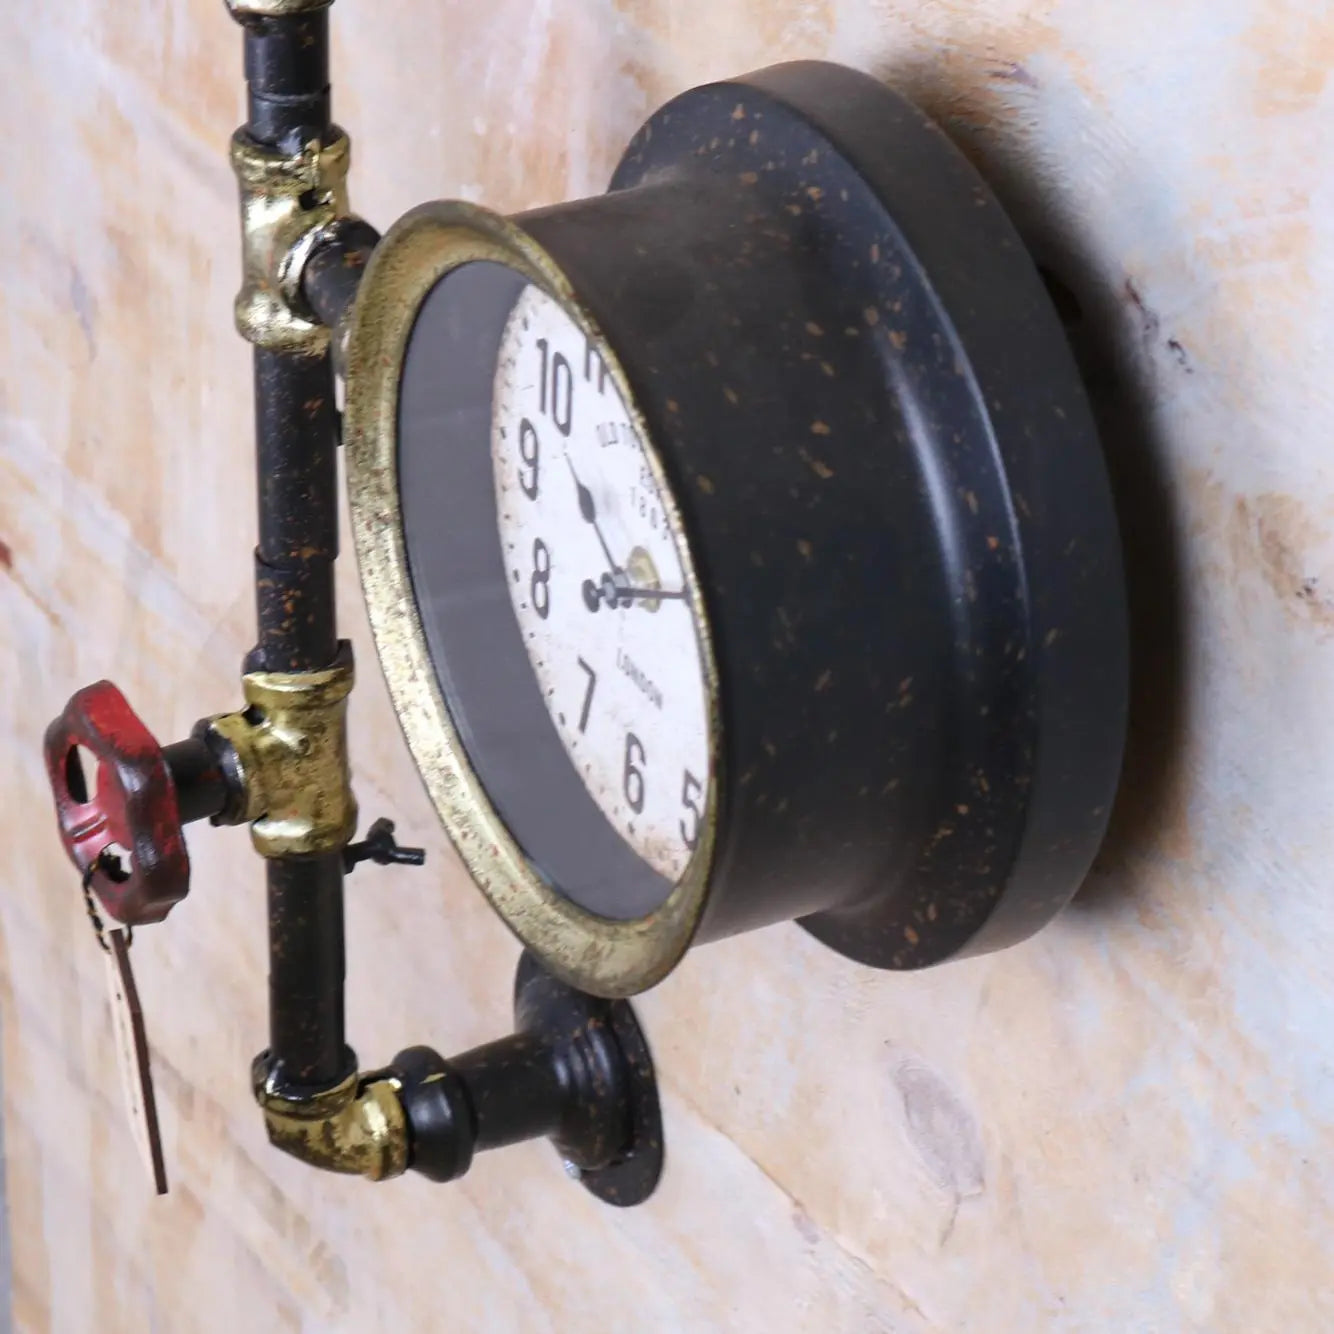 Balpur Industrial Pipe Wall Clock Black and Antique Gold Side View